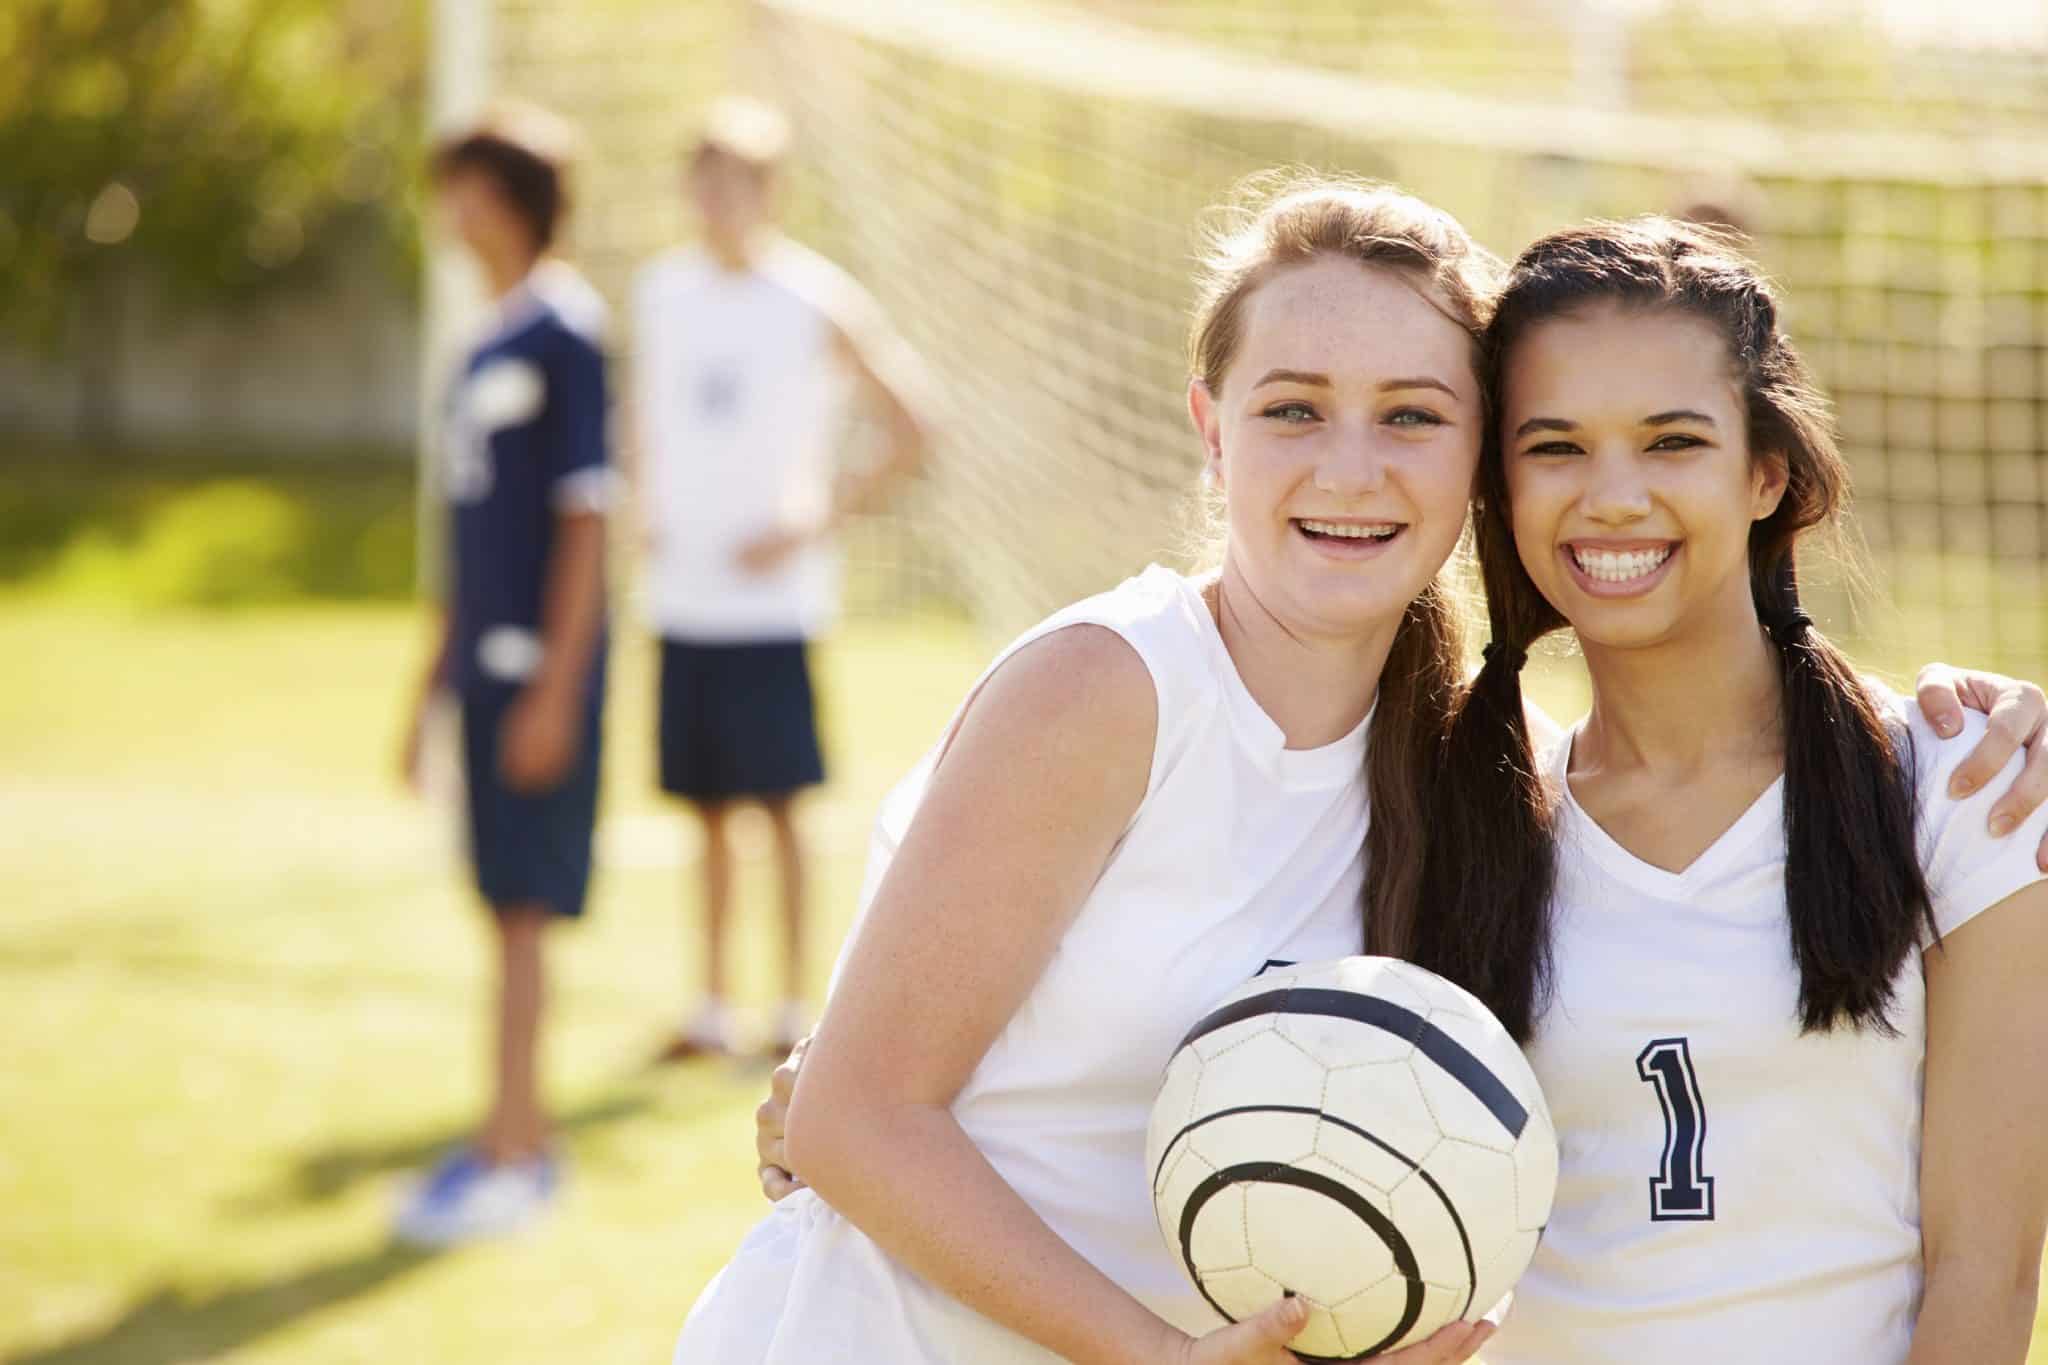 Tampa Bay parenting 2015 September After School Guide Girls Playing Soccer Fall